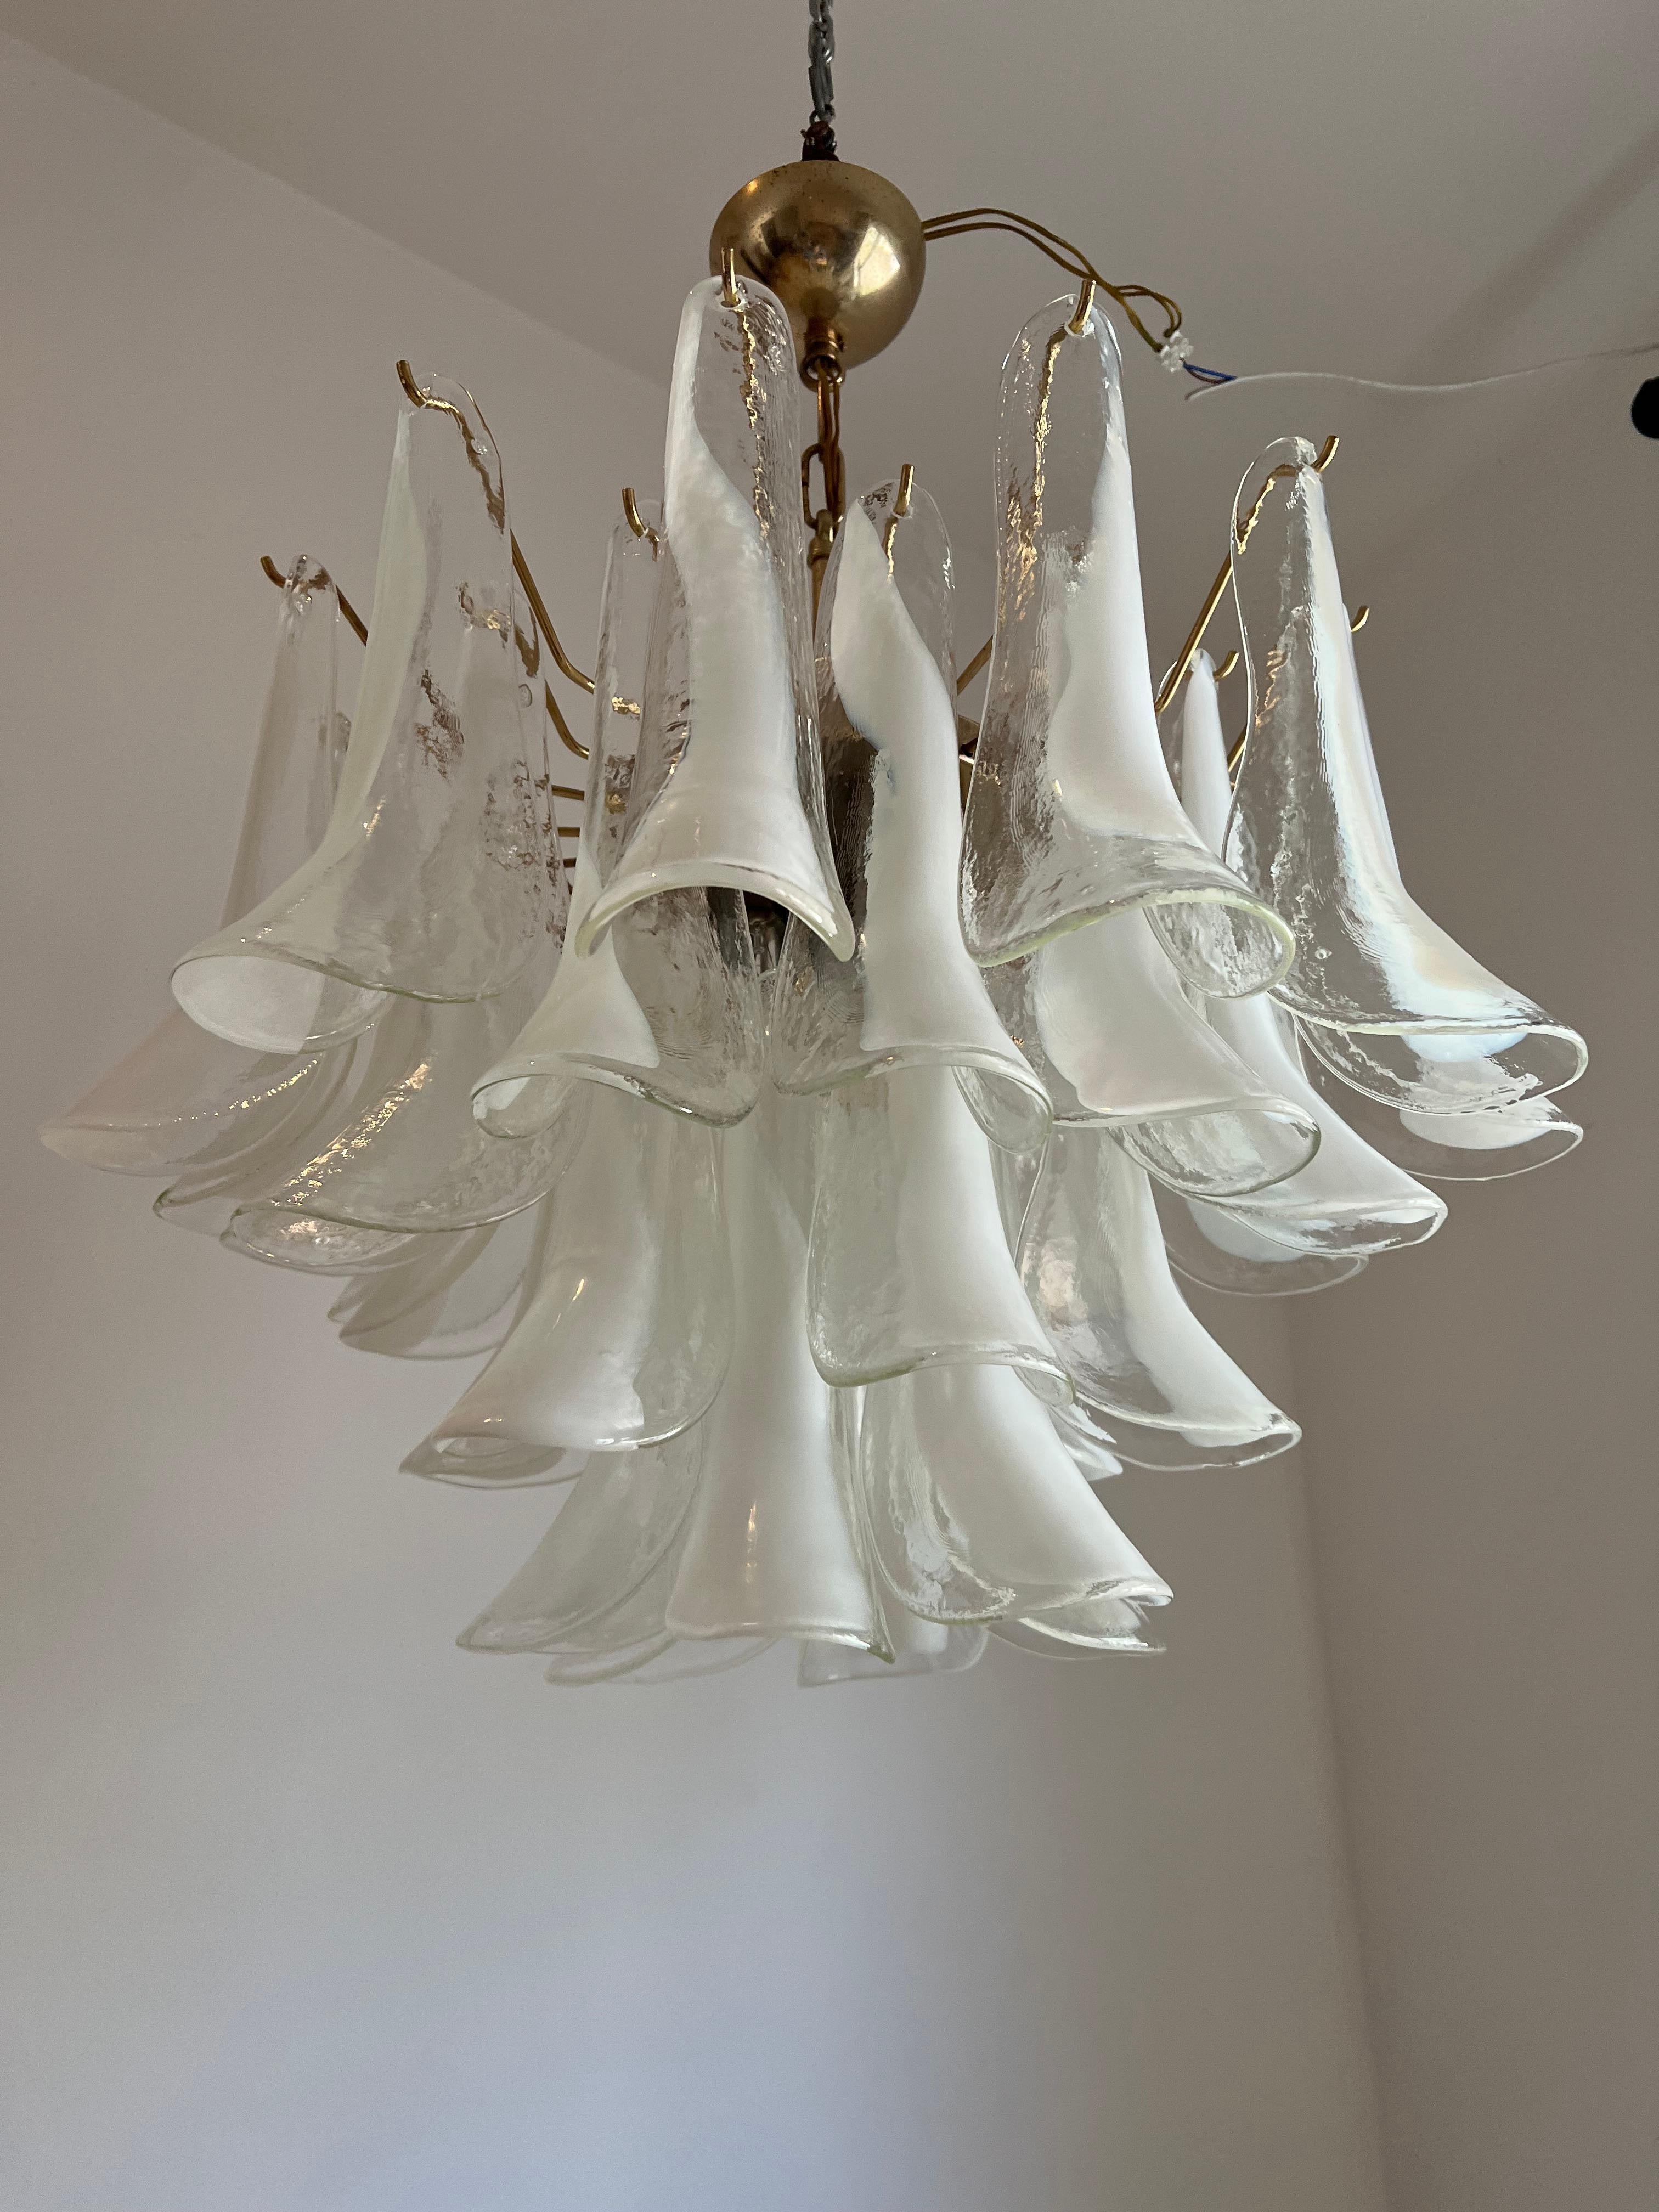 Two Identical Signed Mid-Century Modern Chandeliers, La Murrina in Murano Glass In Good Condition For Sale In Merida, Yucatan